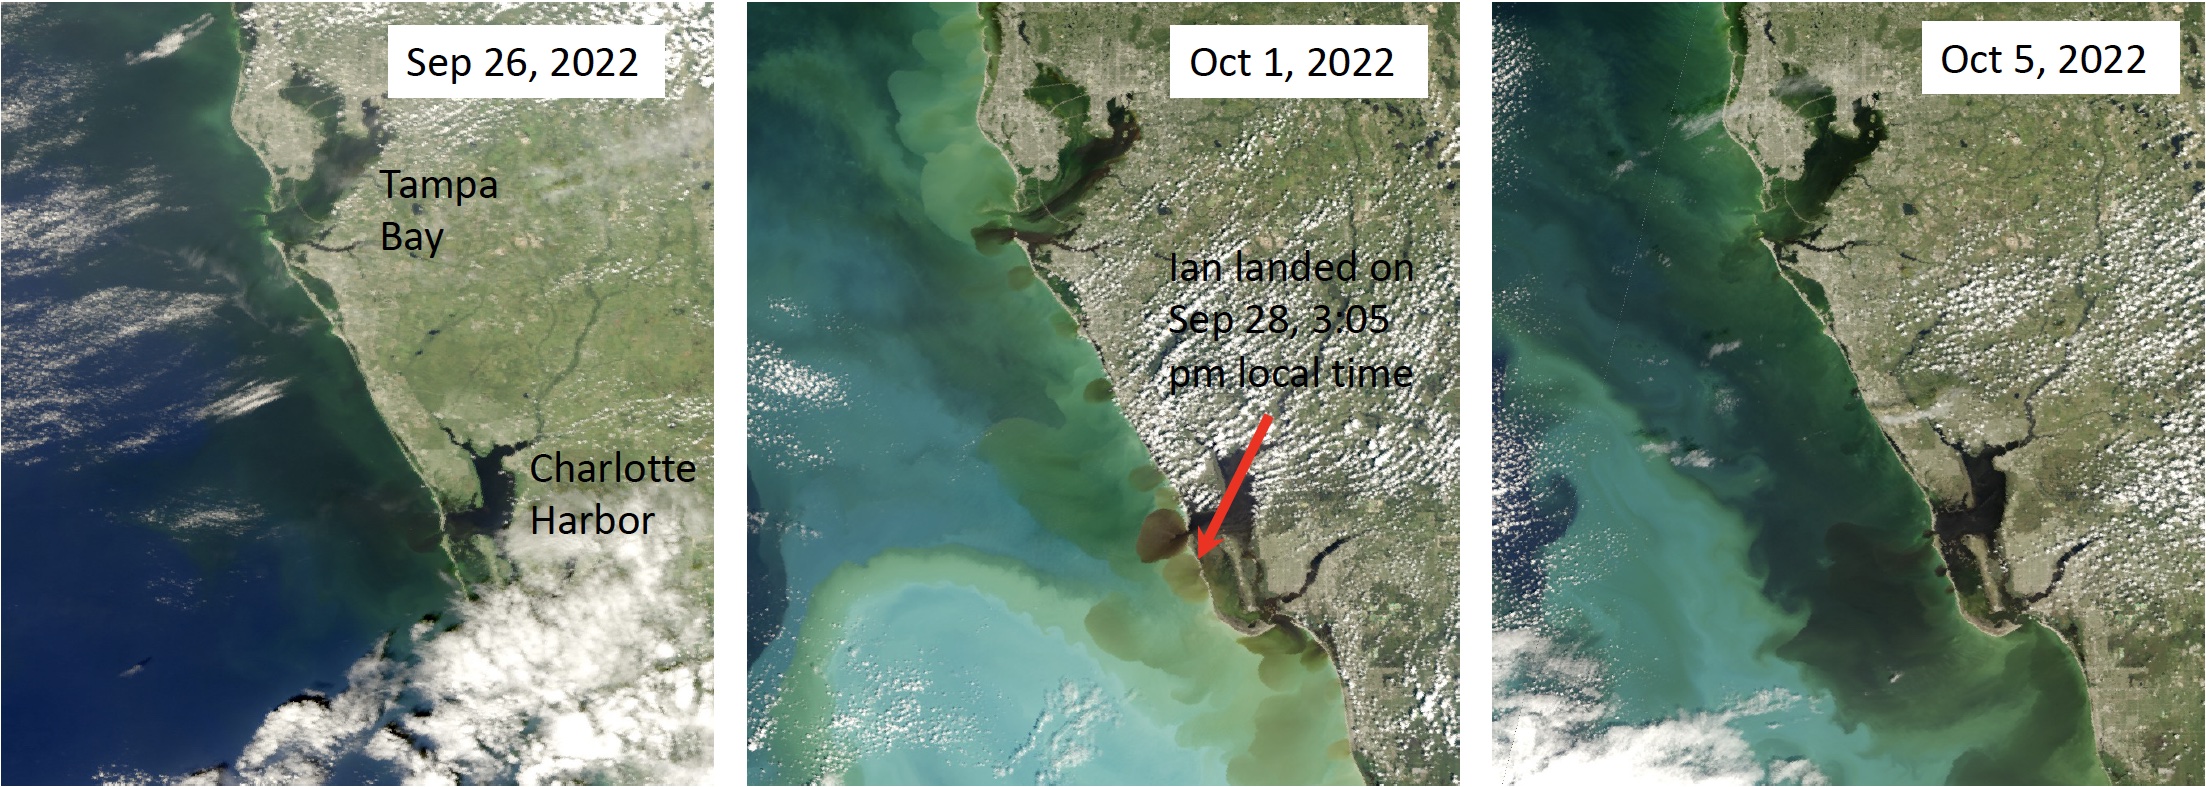 True-color satellite images show resuspended silt and discharge from rivers and estuaries following Ian’s historic inland rainfall. 